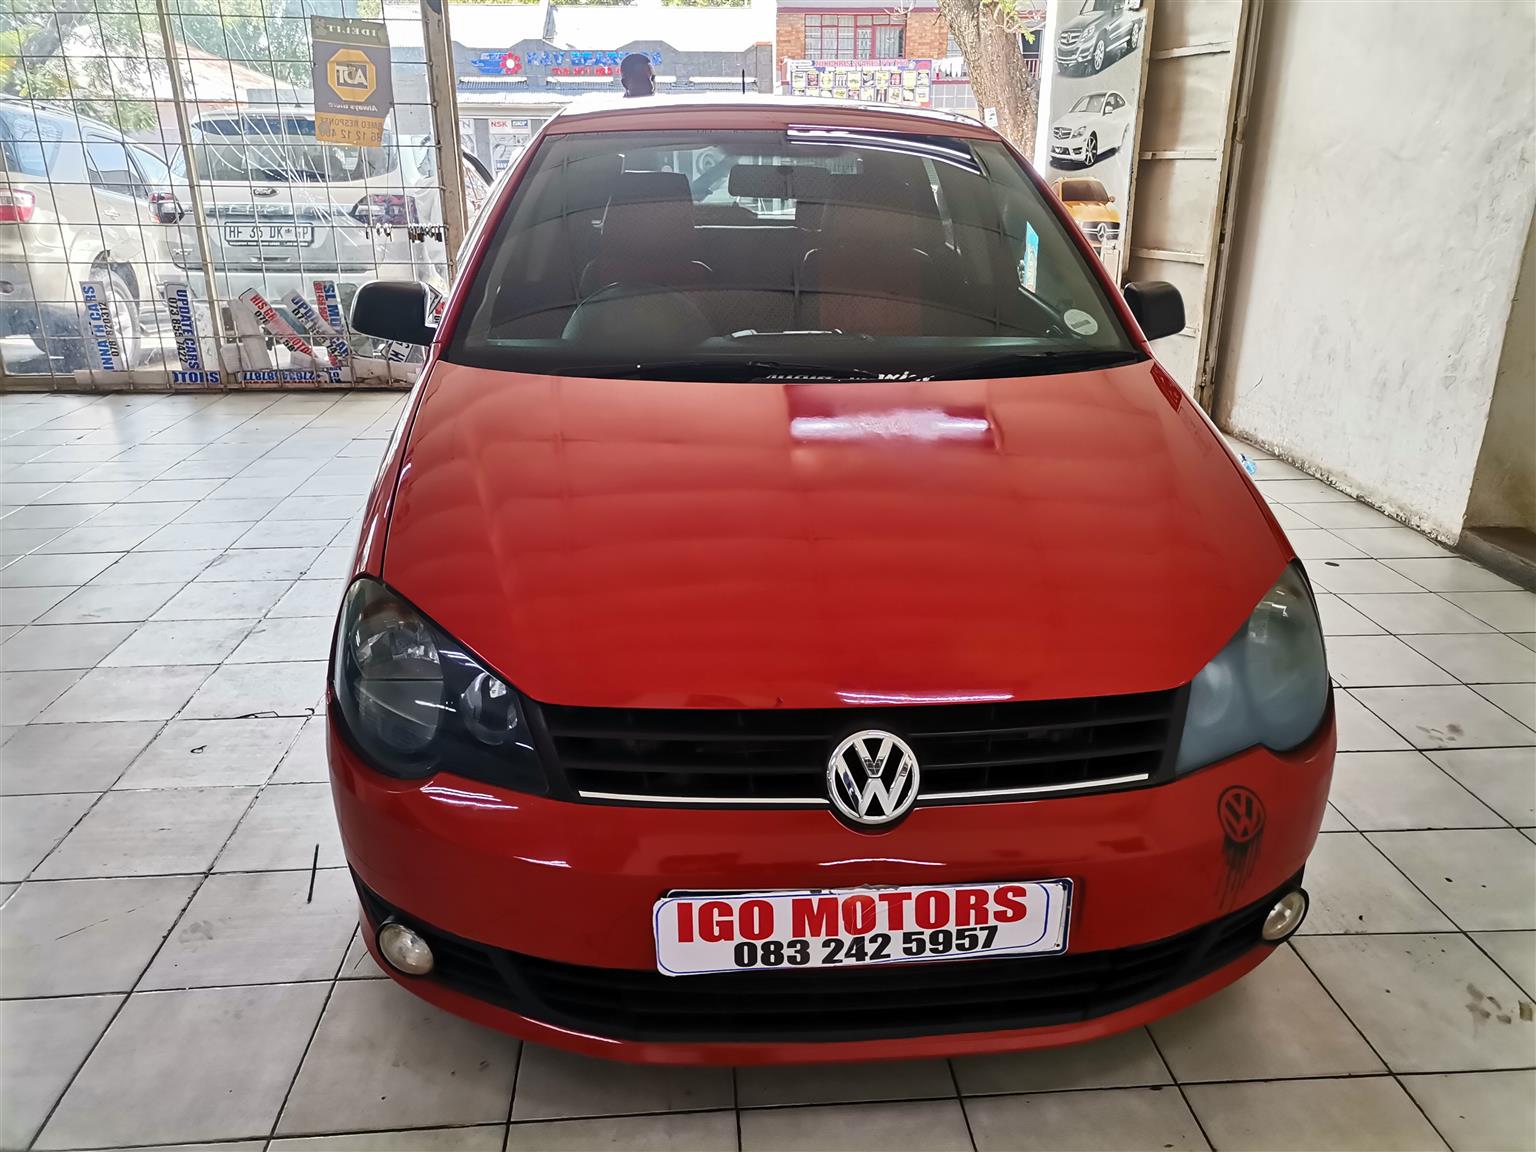 2011 POLO VIVO 1.6 MANUAL Mechanically perfect with Clothes Seat